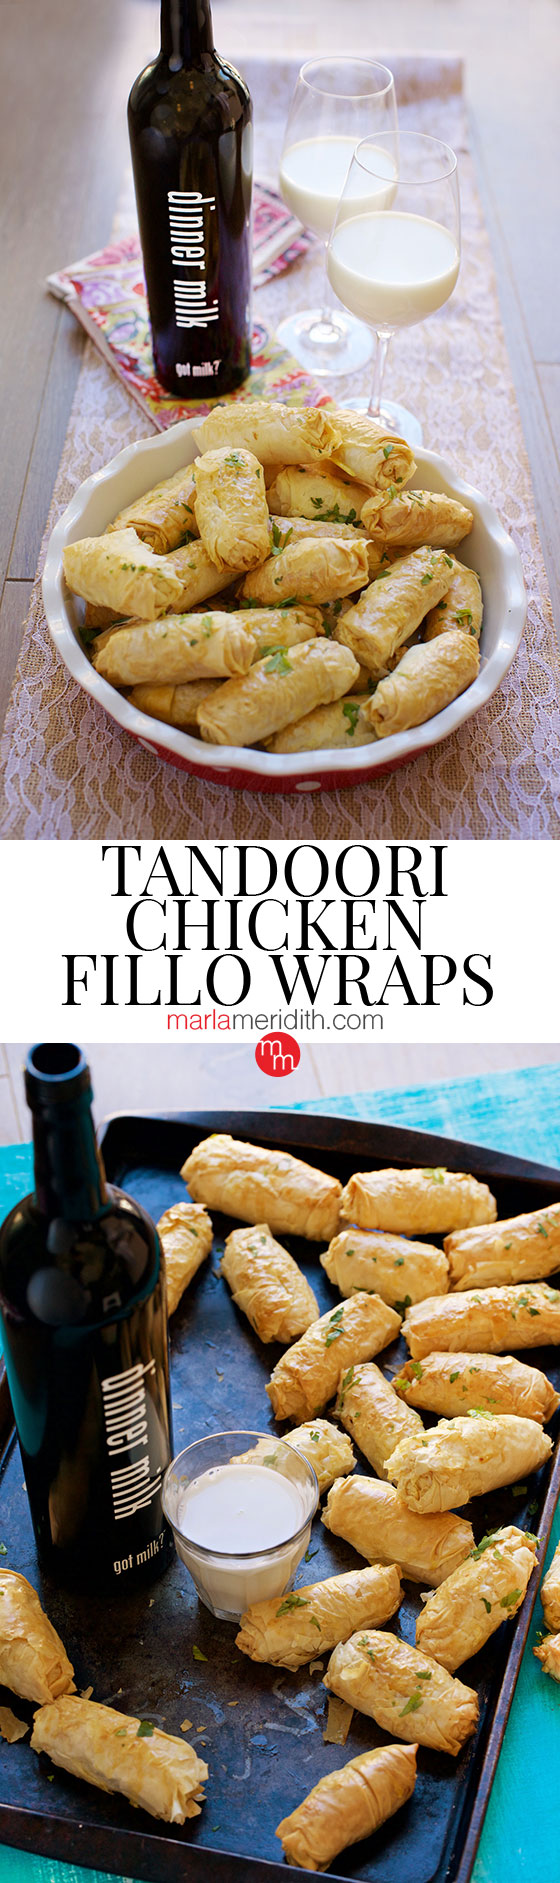 Tandoori Chicken Fillo Wraps recipe, a delicious appetizer for Super Bowl parties and any entertaining! MarlaMeridith.com ( @marlameridith )